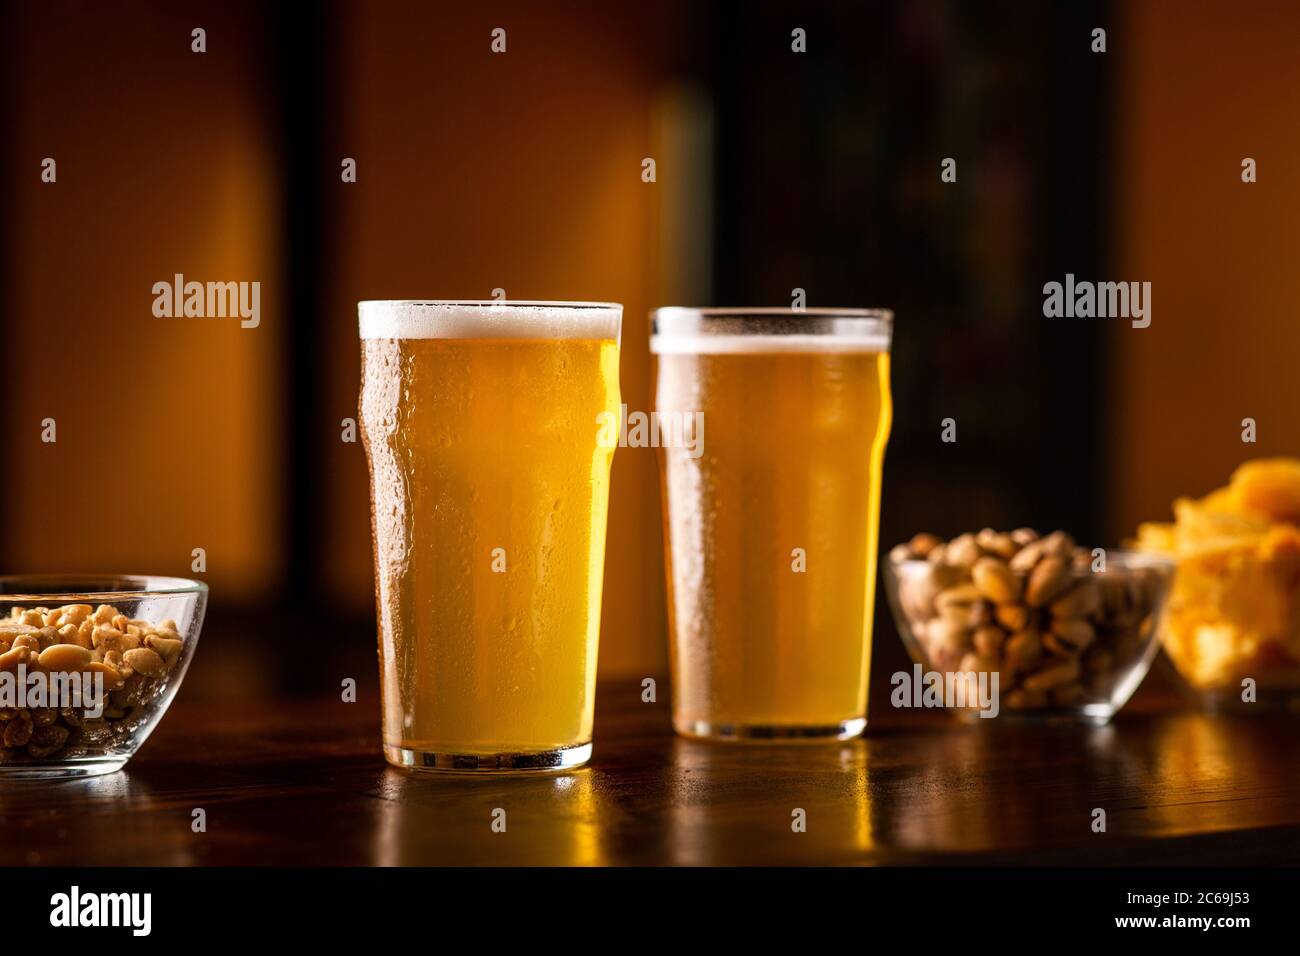 Two glasses of lager on wooden table, near are pistachios, nuts and chips in glass plates Stock Photo